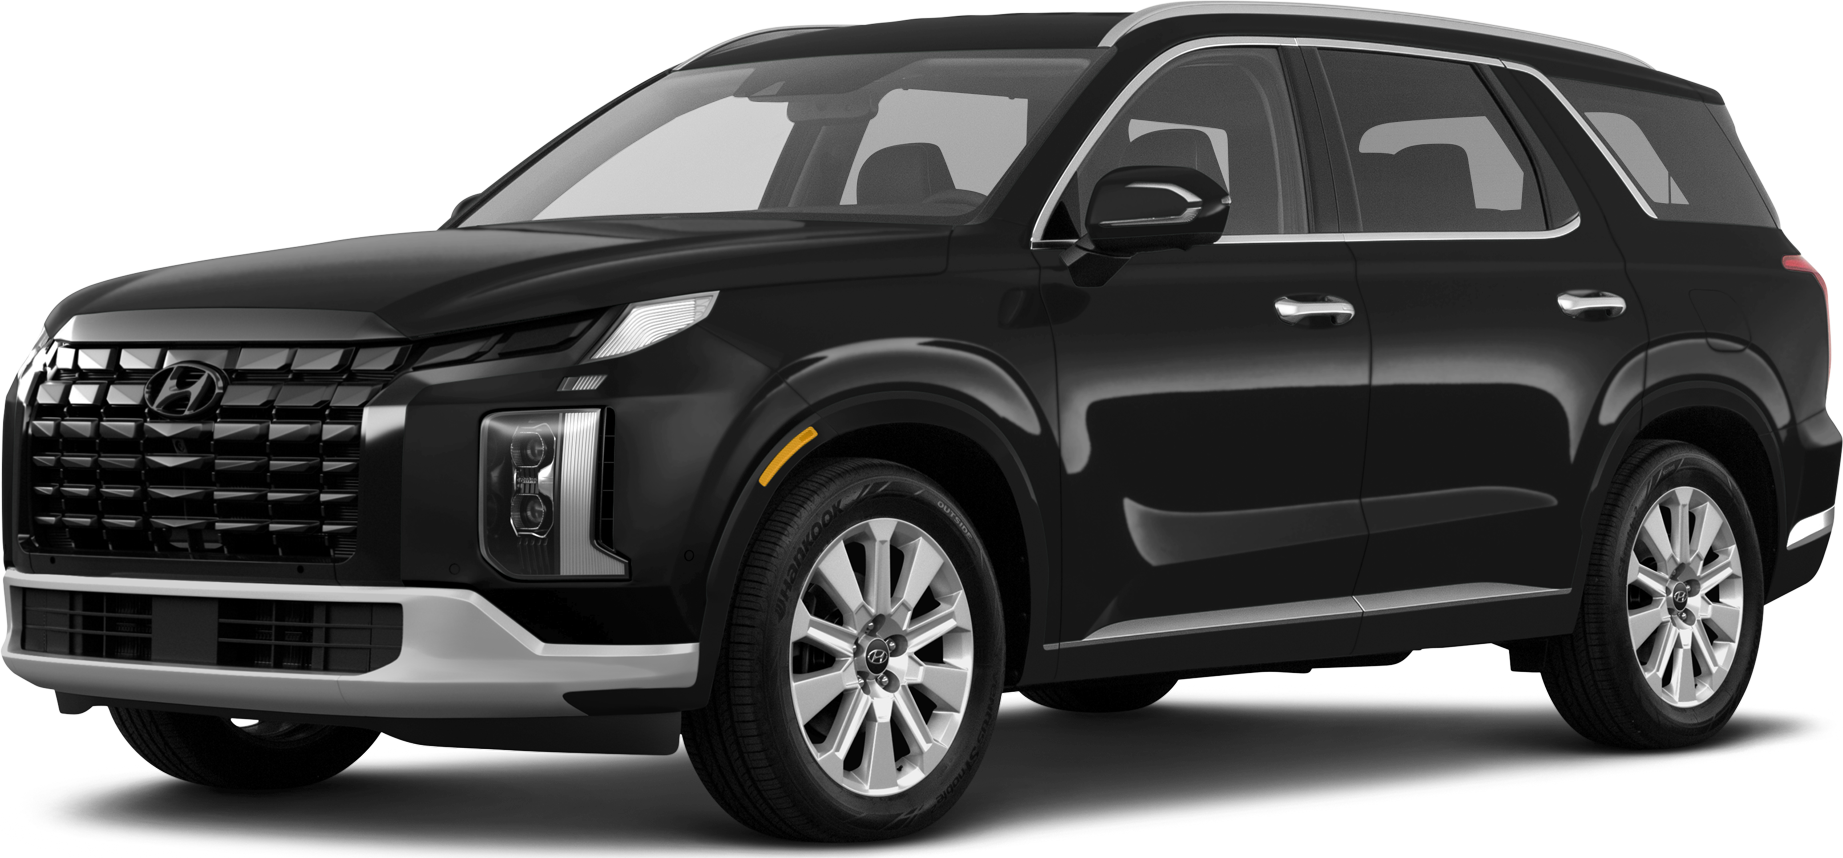 2023 Hyundai Palisade Specs and Features